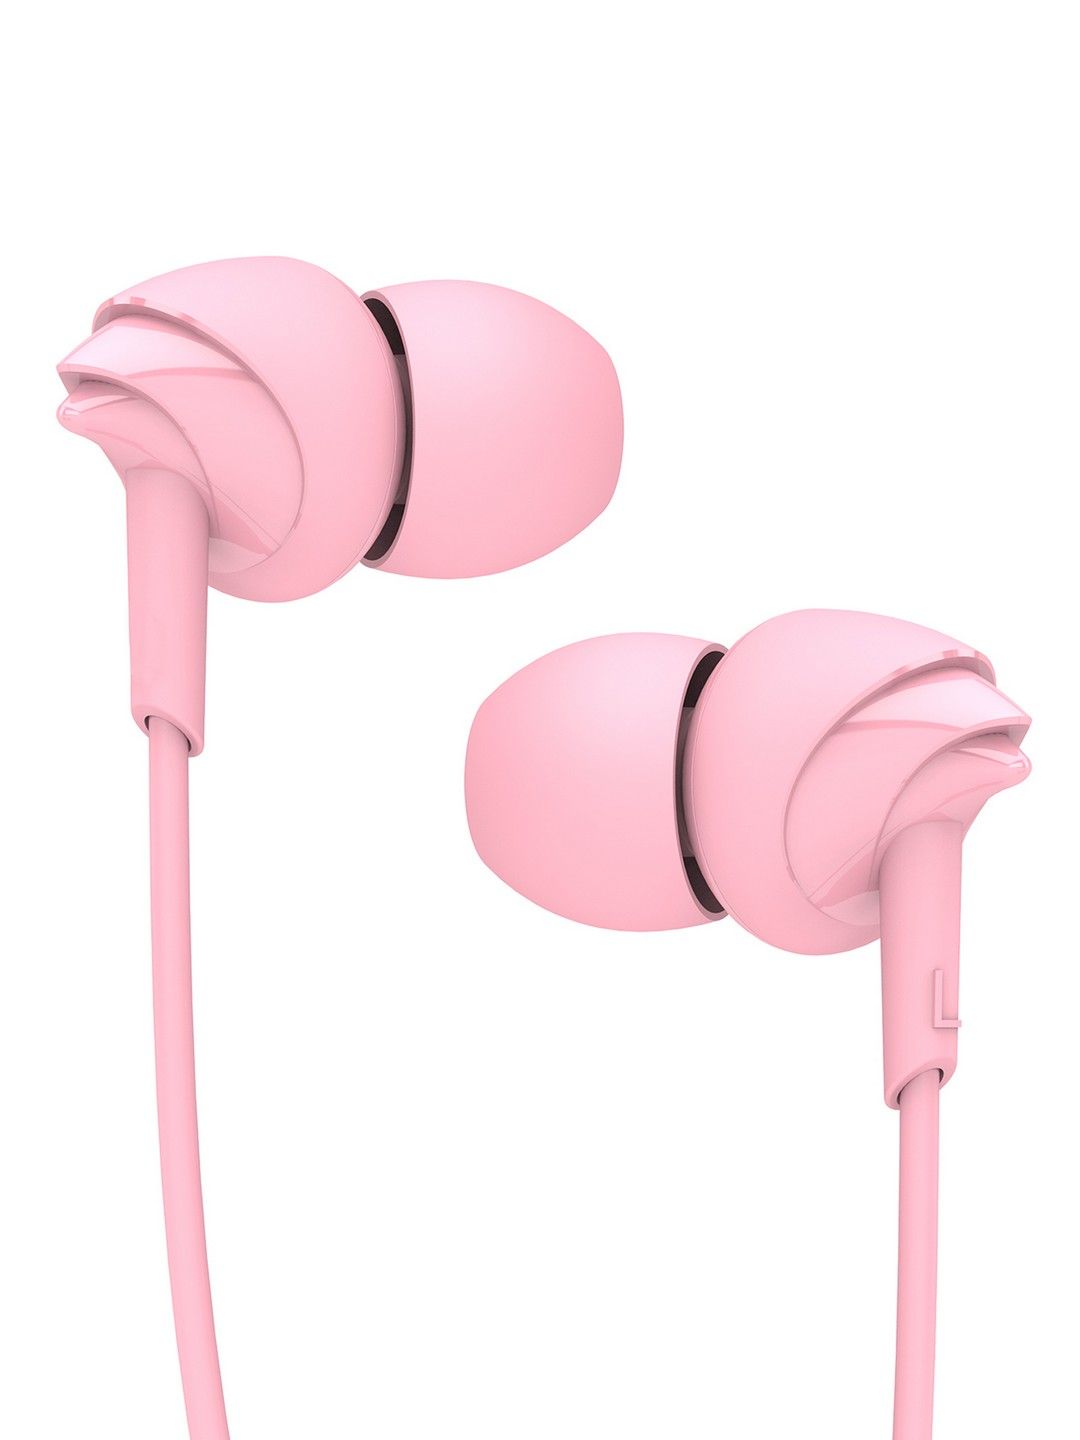 boAt BassHeads 100 M Taffy Pink Earphones with Enhanced Bass Hawk-Inspired Design & Mic Price in India